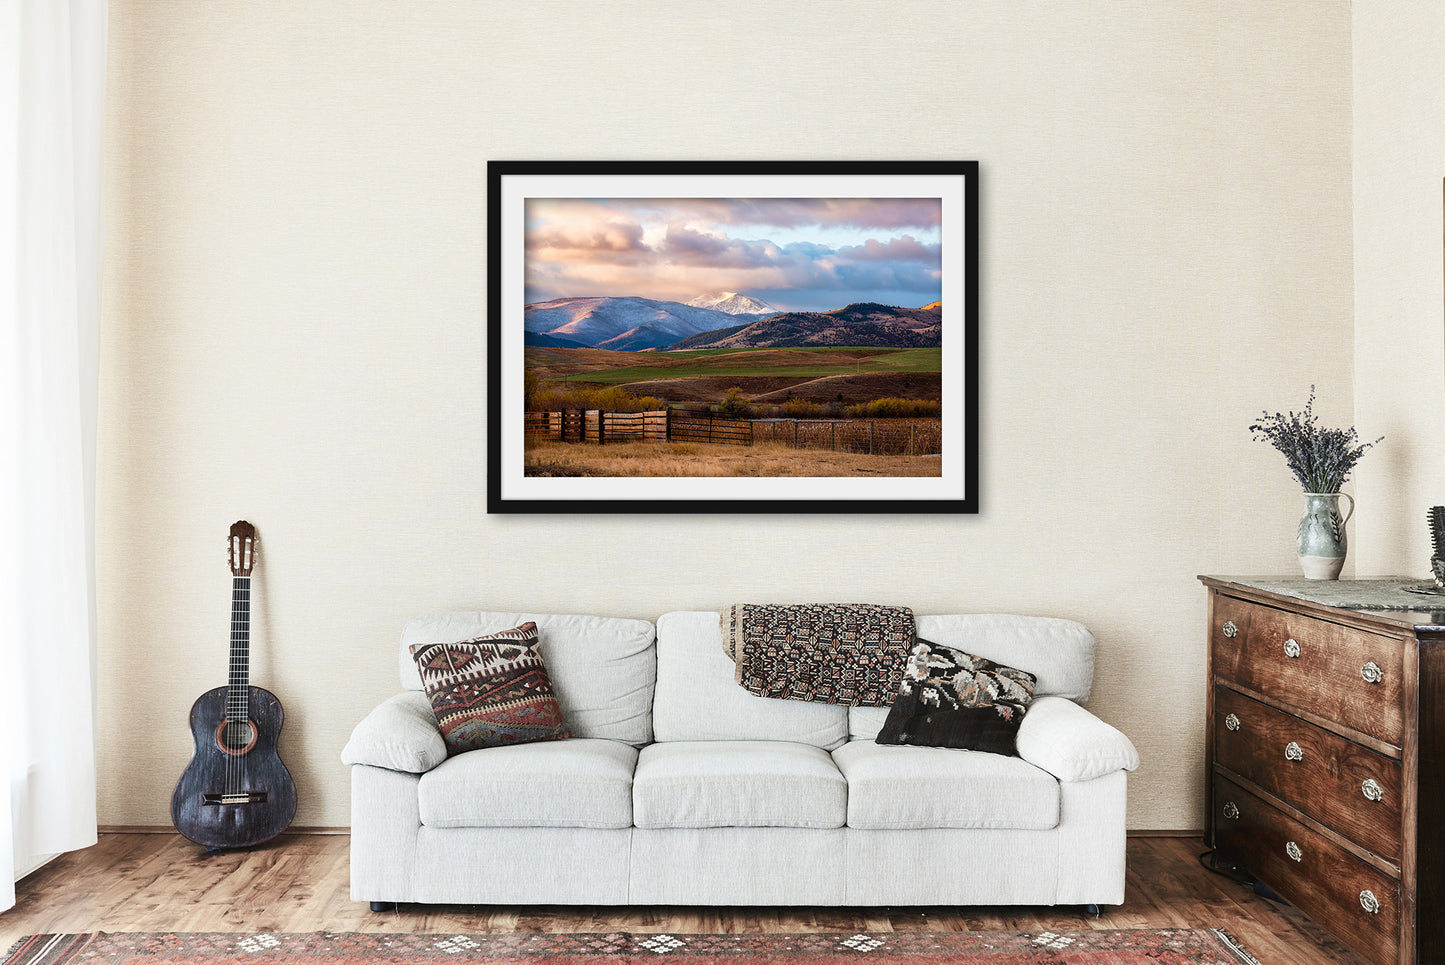 Framed and Matted Print - Picture of Snowy Peak Overlooking Valley on Autumn Morning in Montana Rocky Mountain Wall Art Western Decor